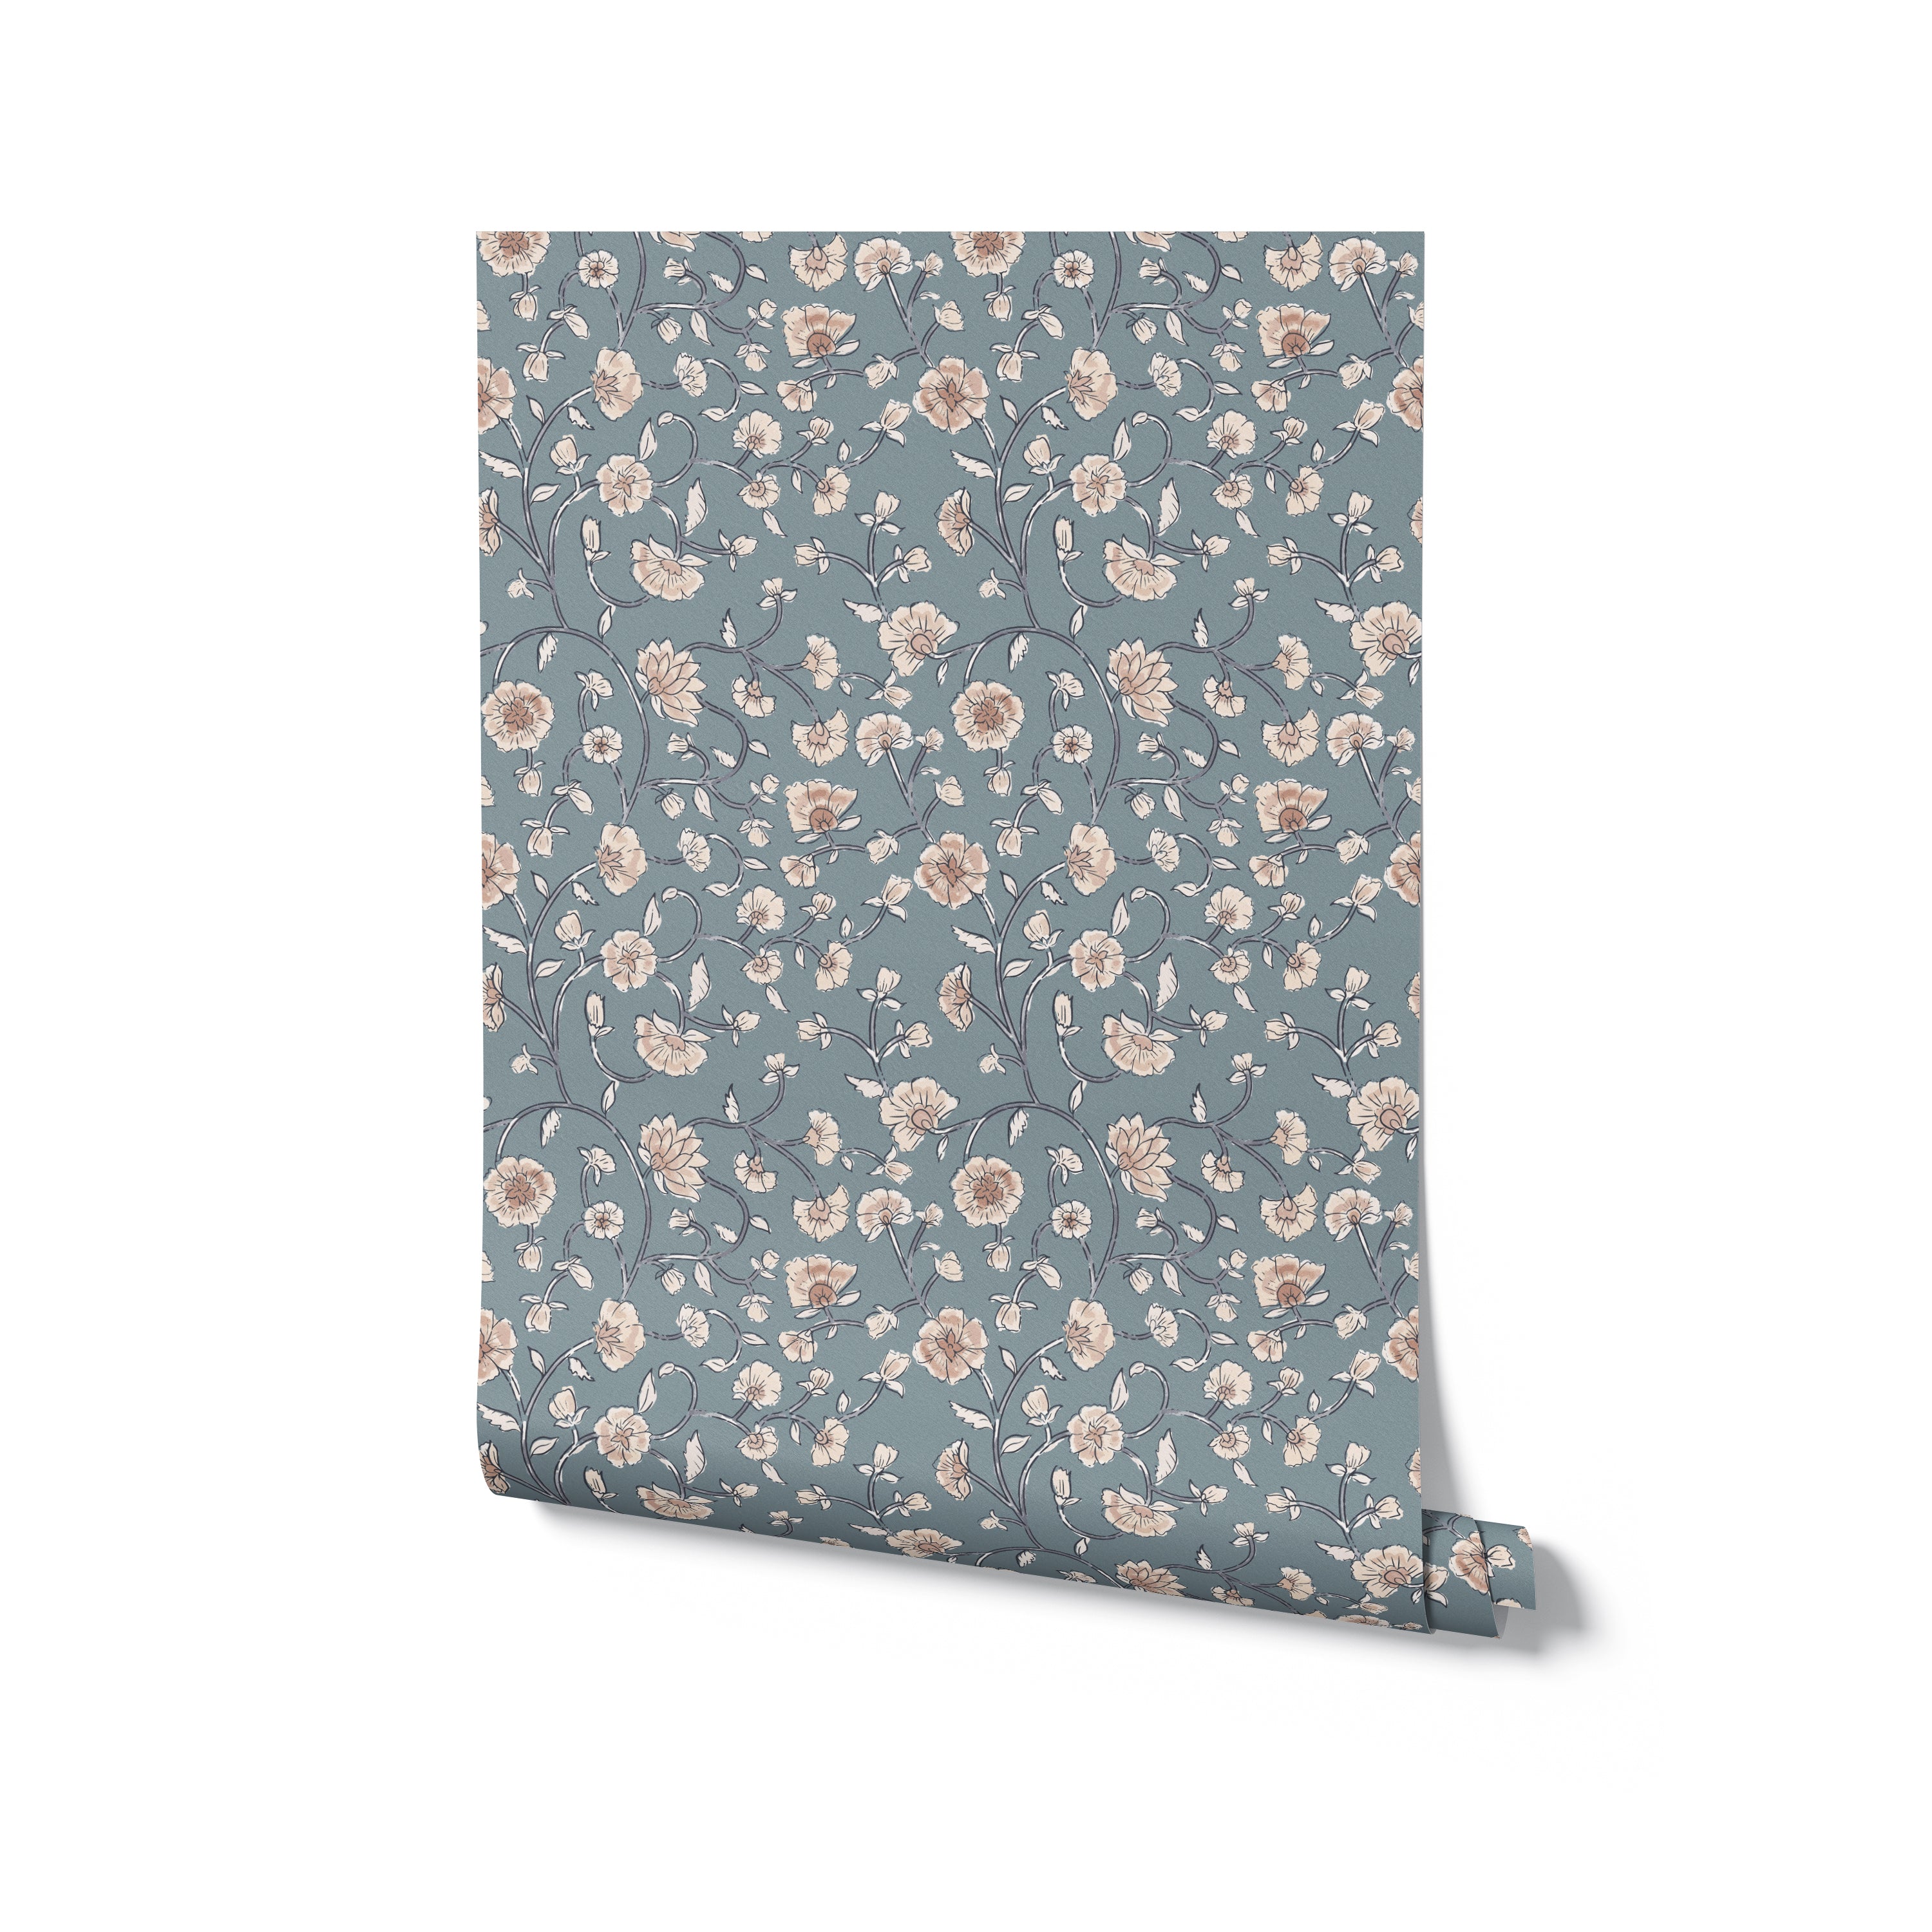 A roll of Eternal Spring Wallpaper displaying a detailed pattern of beige flowers connected by blue vines on a soft teal background. The design evokes a sense of renewal and calm, perfect for adding a touch of springtime elegance to any room